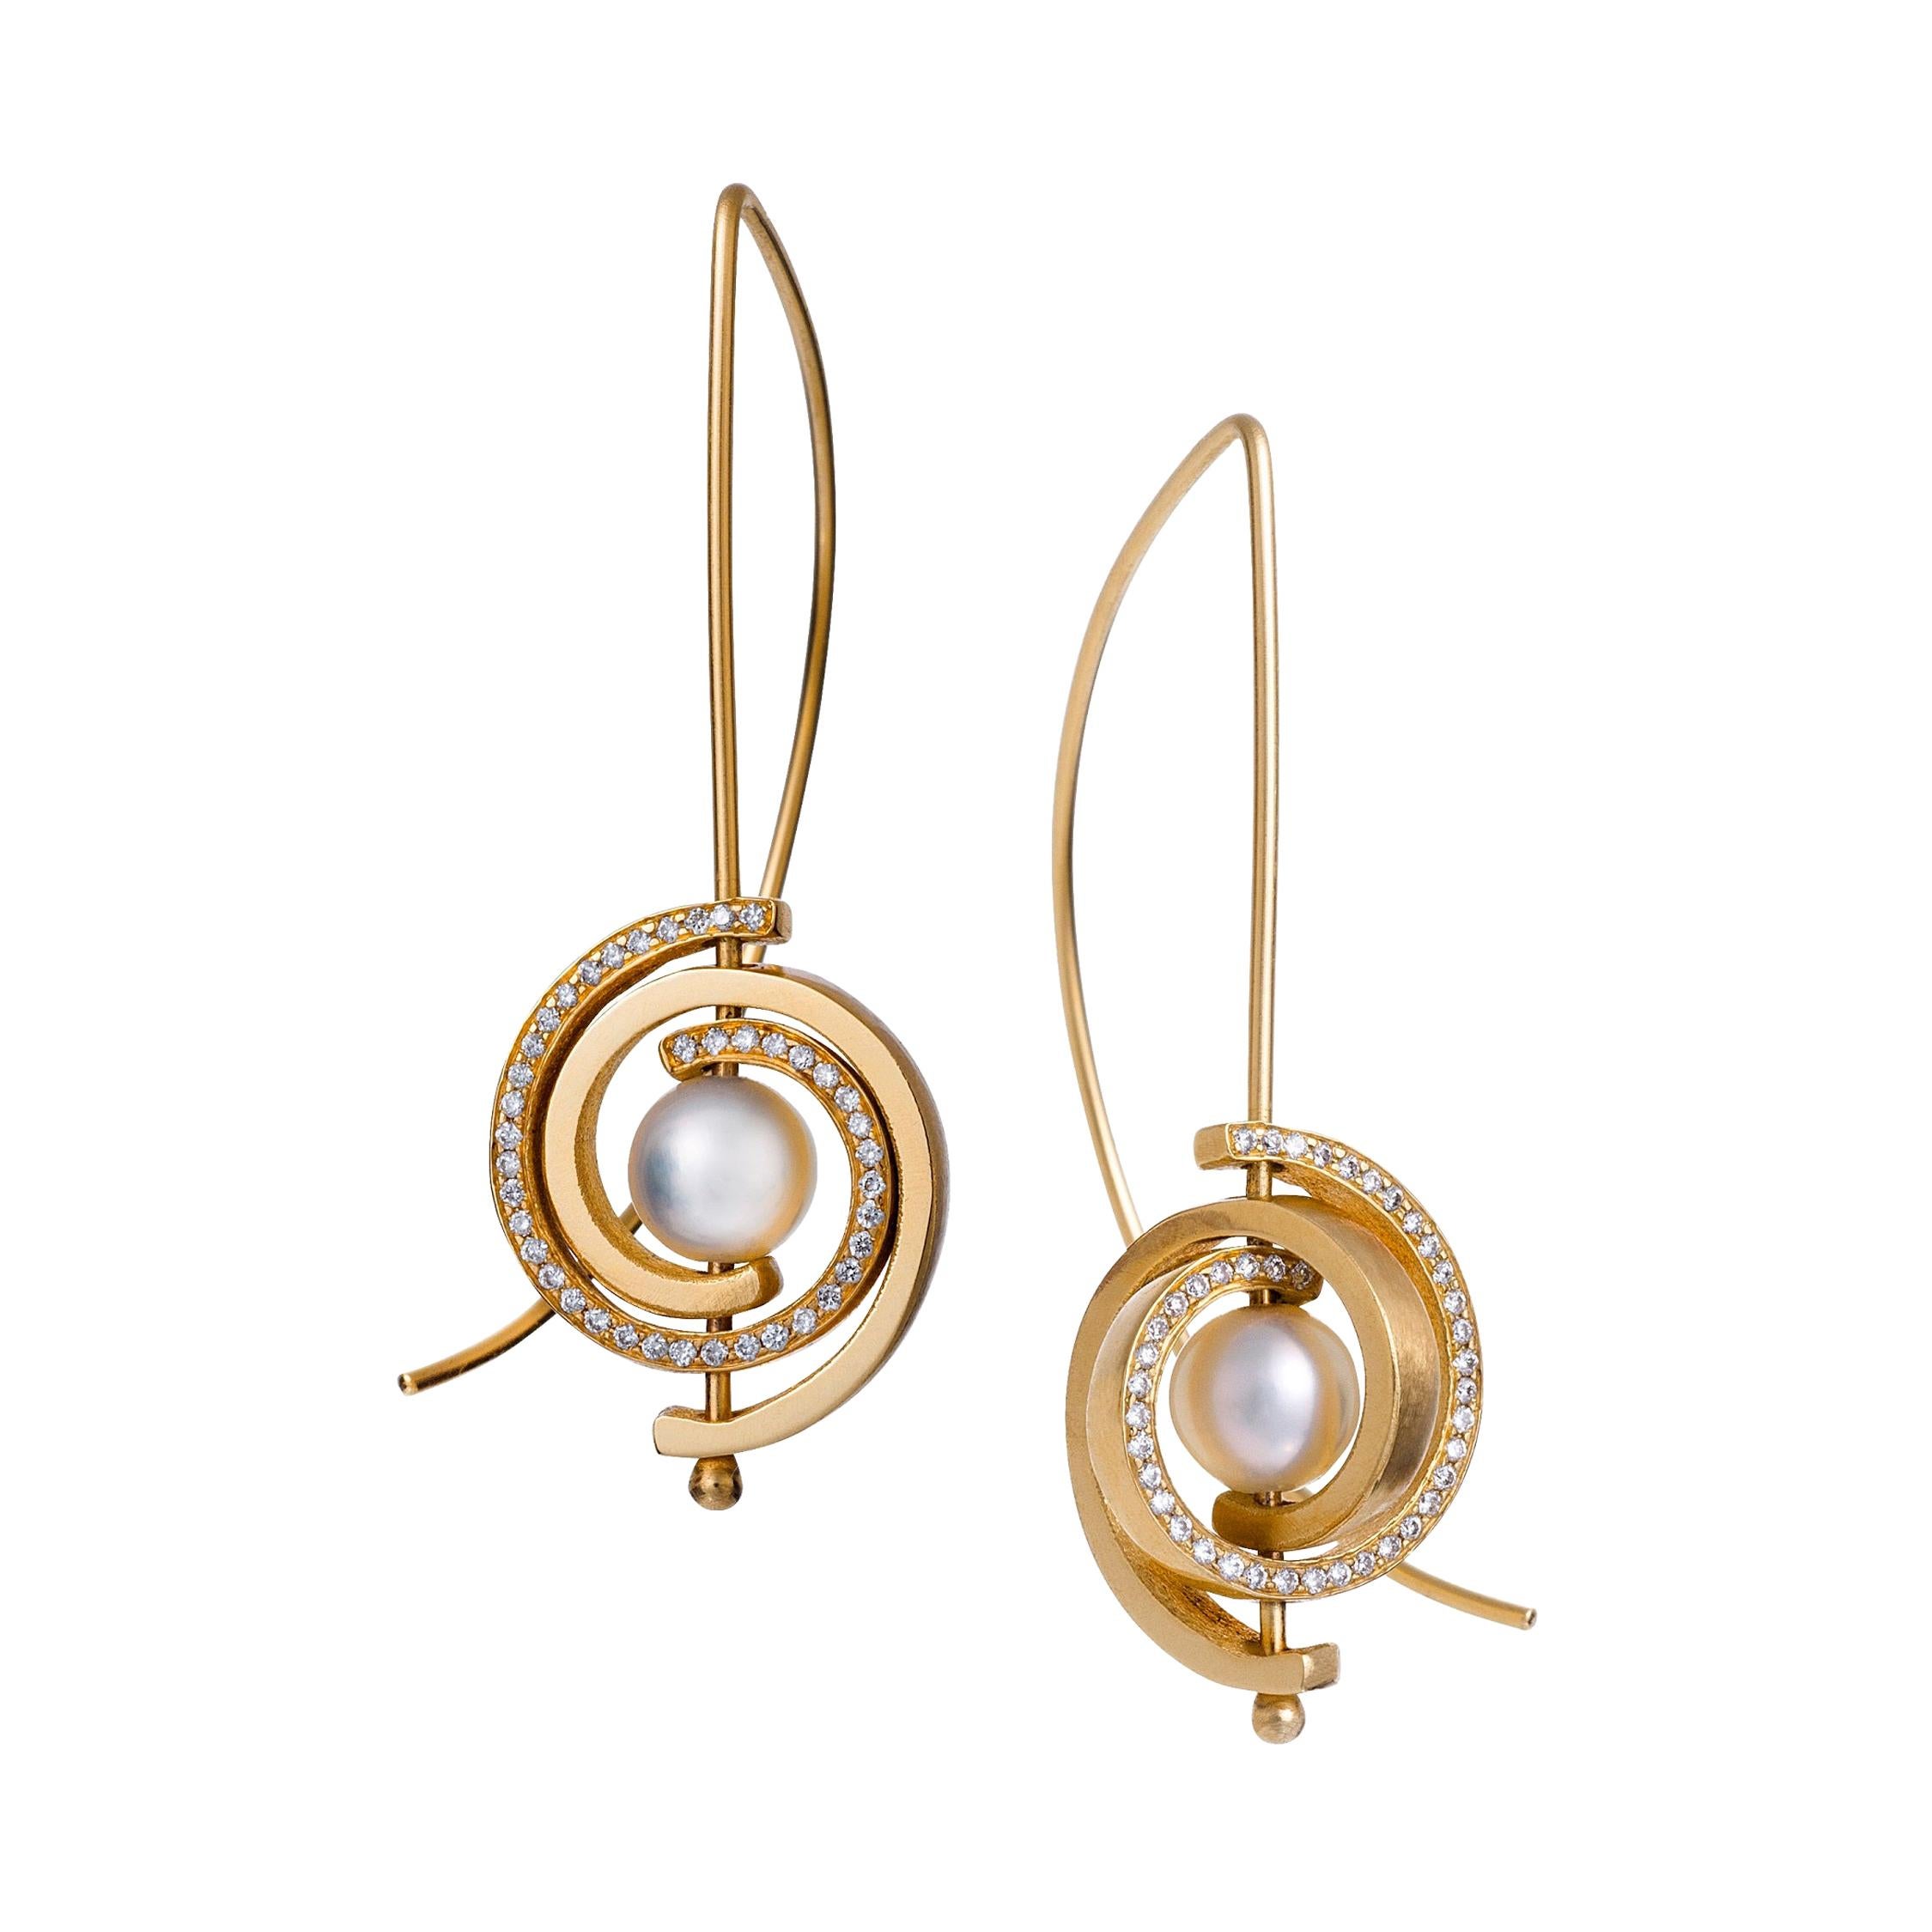 Contemporary Petite Dangle Earrings in 14k Gold with Akoya Pearl and Diamonds